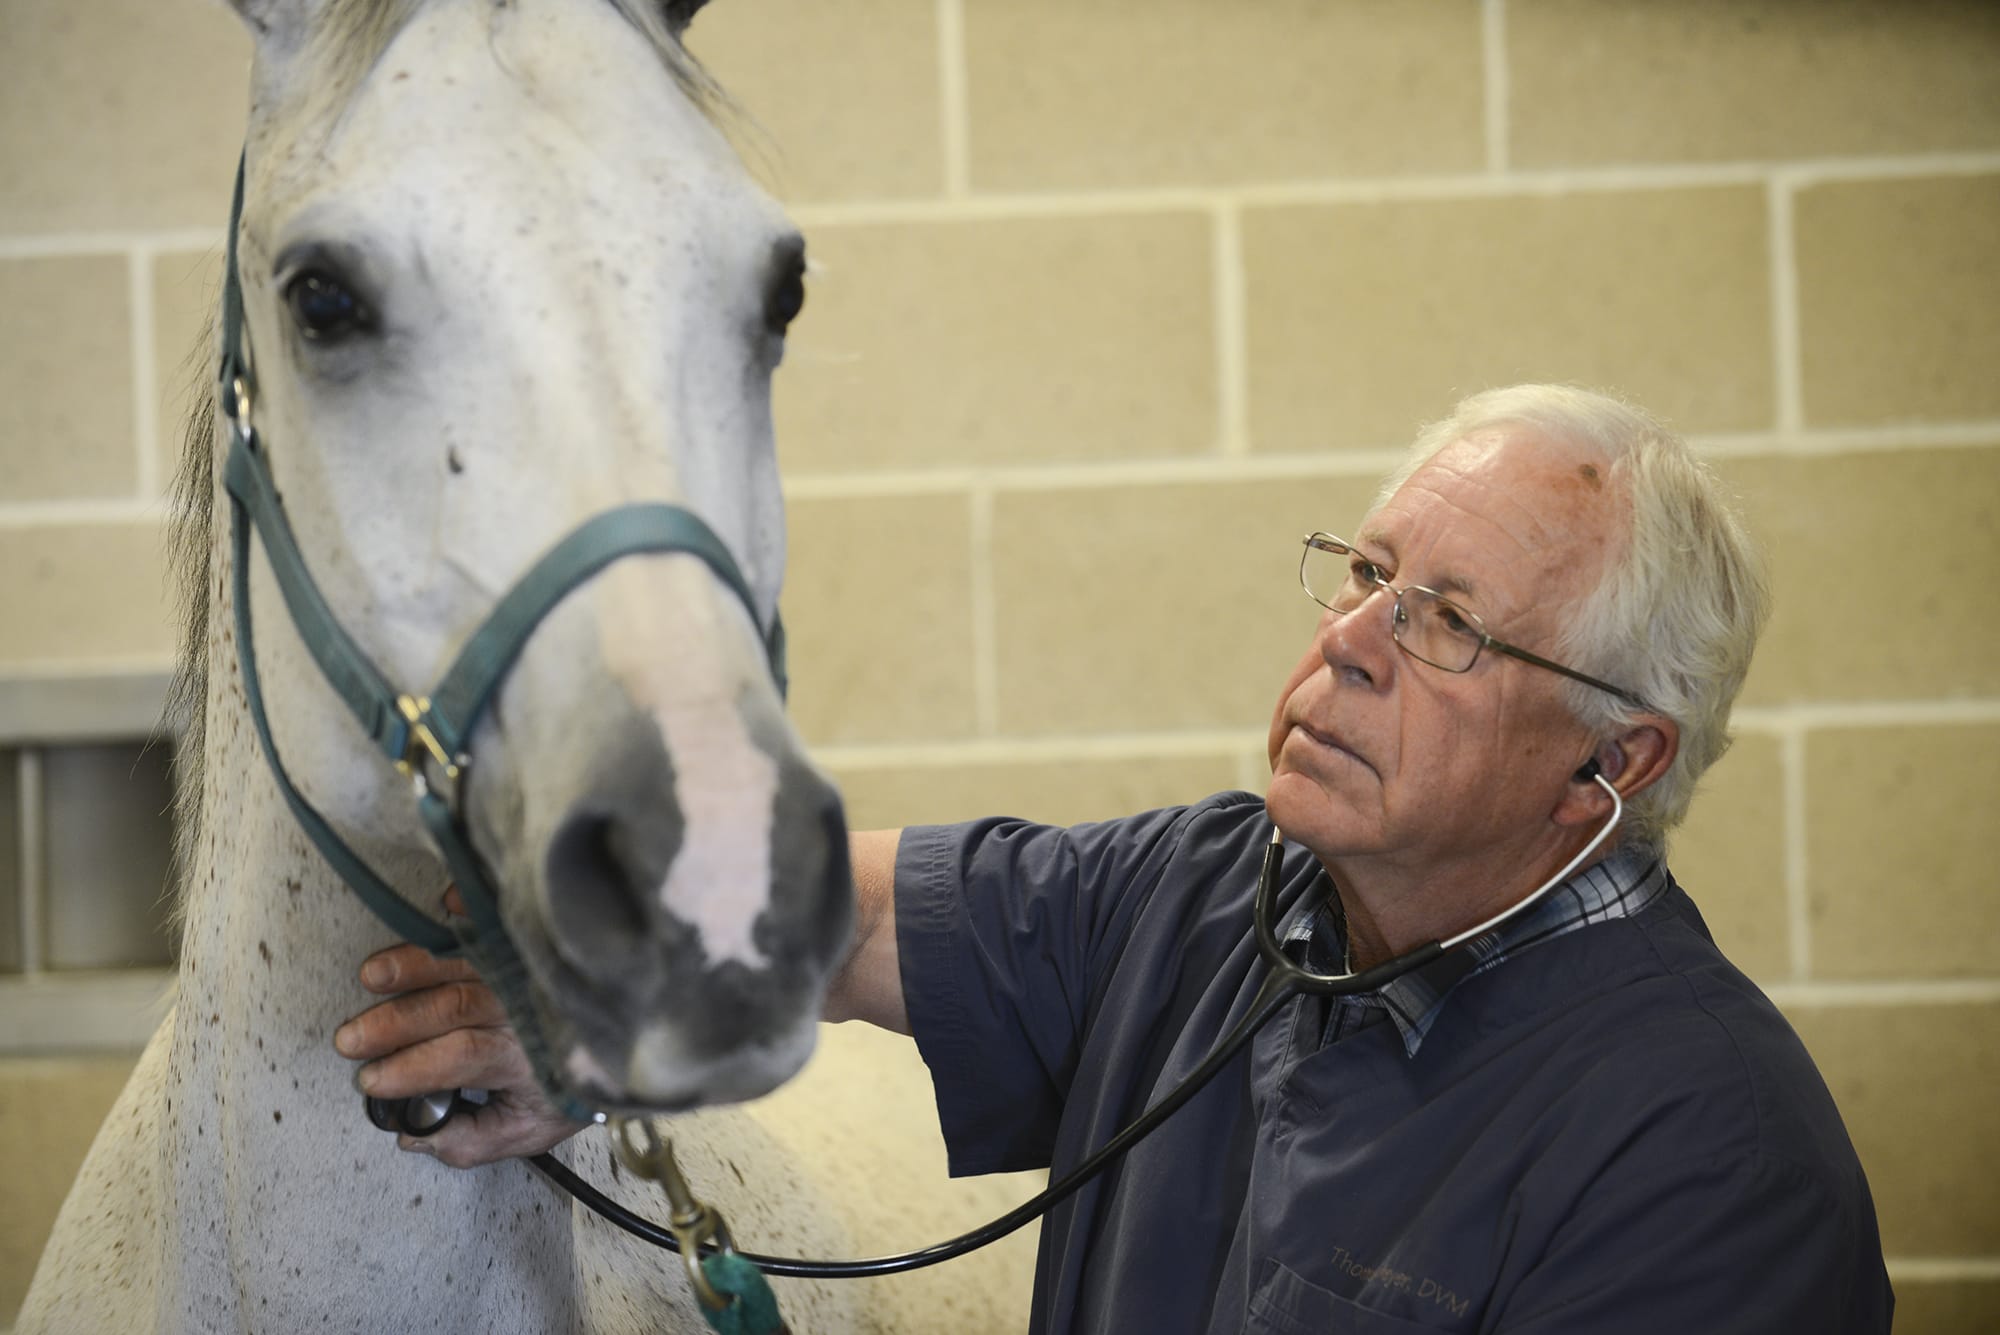 Veterinarian Thomas Meyer examines a Shagya Arabian horse before surgery at Mountain View Veterinary Hospital on Tuesday, September 8, 2015. Meyer was recently named president-elect of the American Veterinary Medical Association.